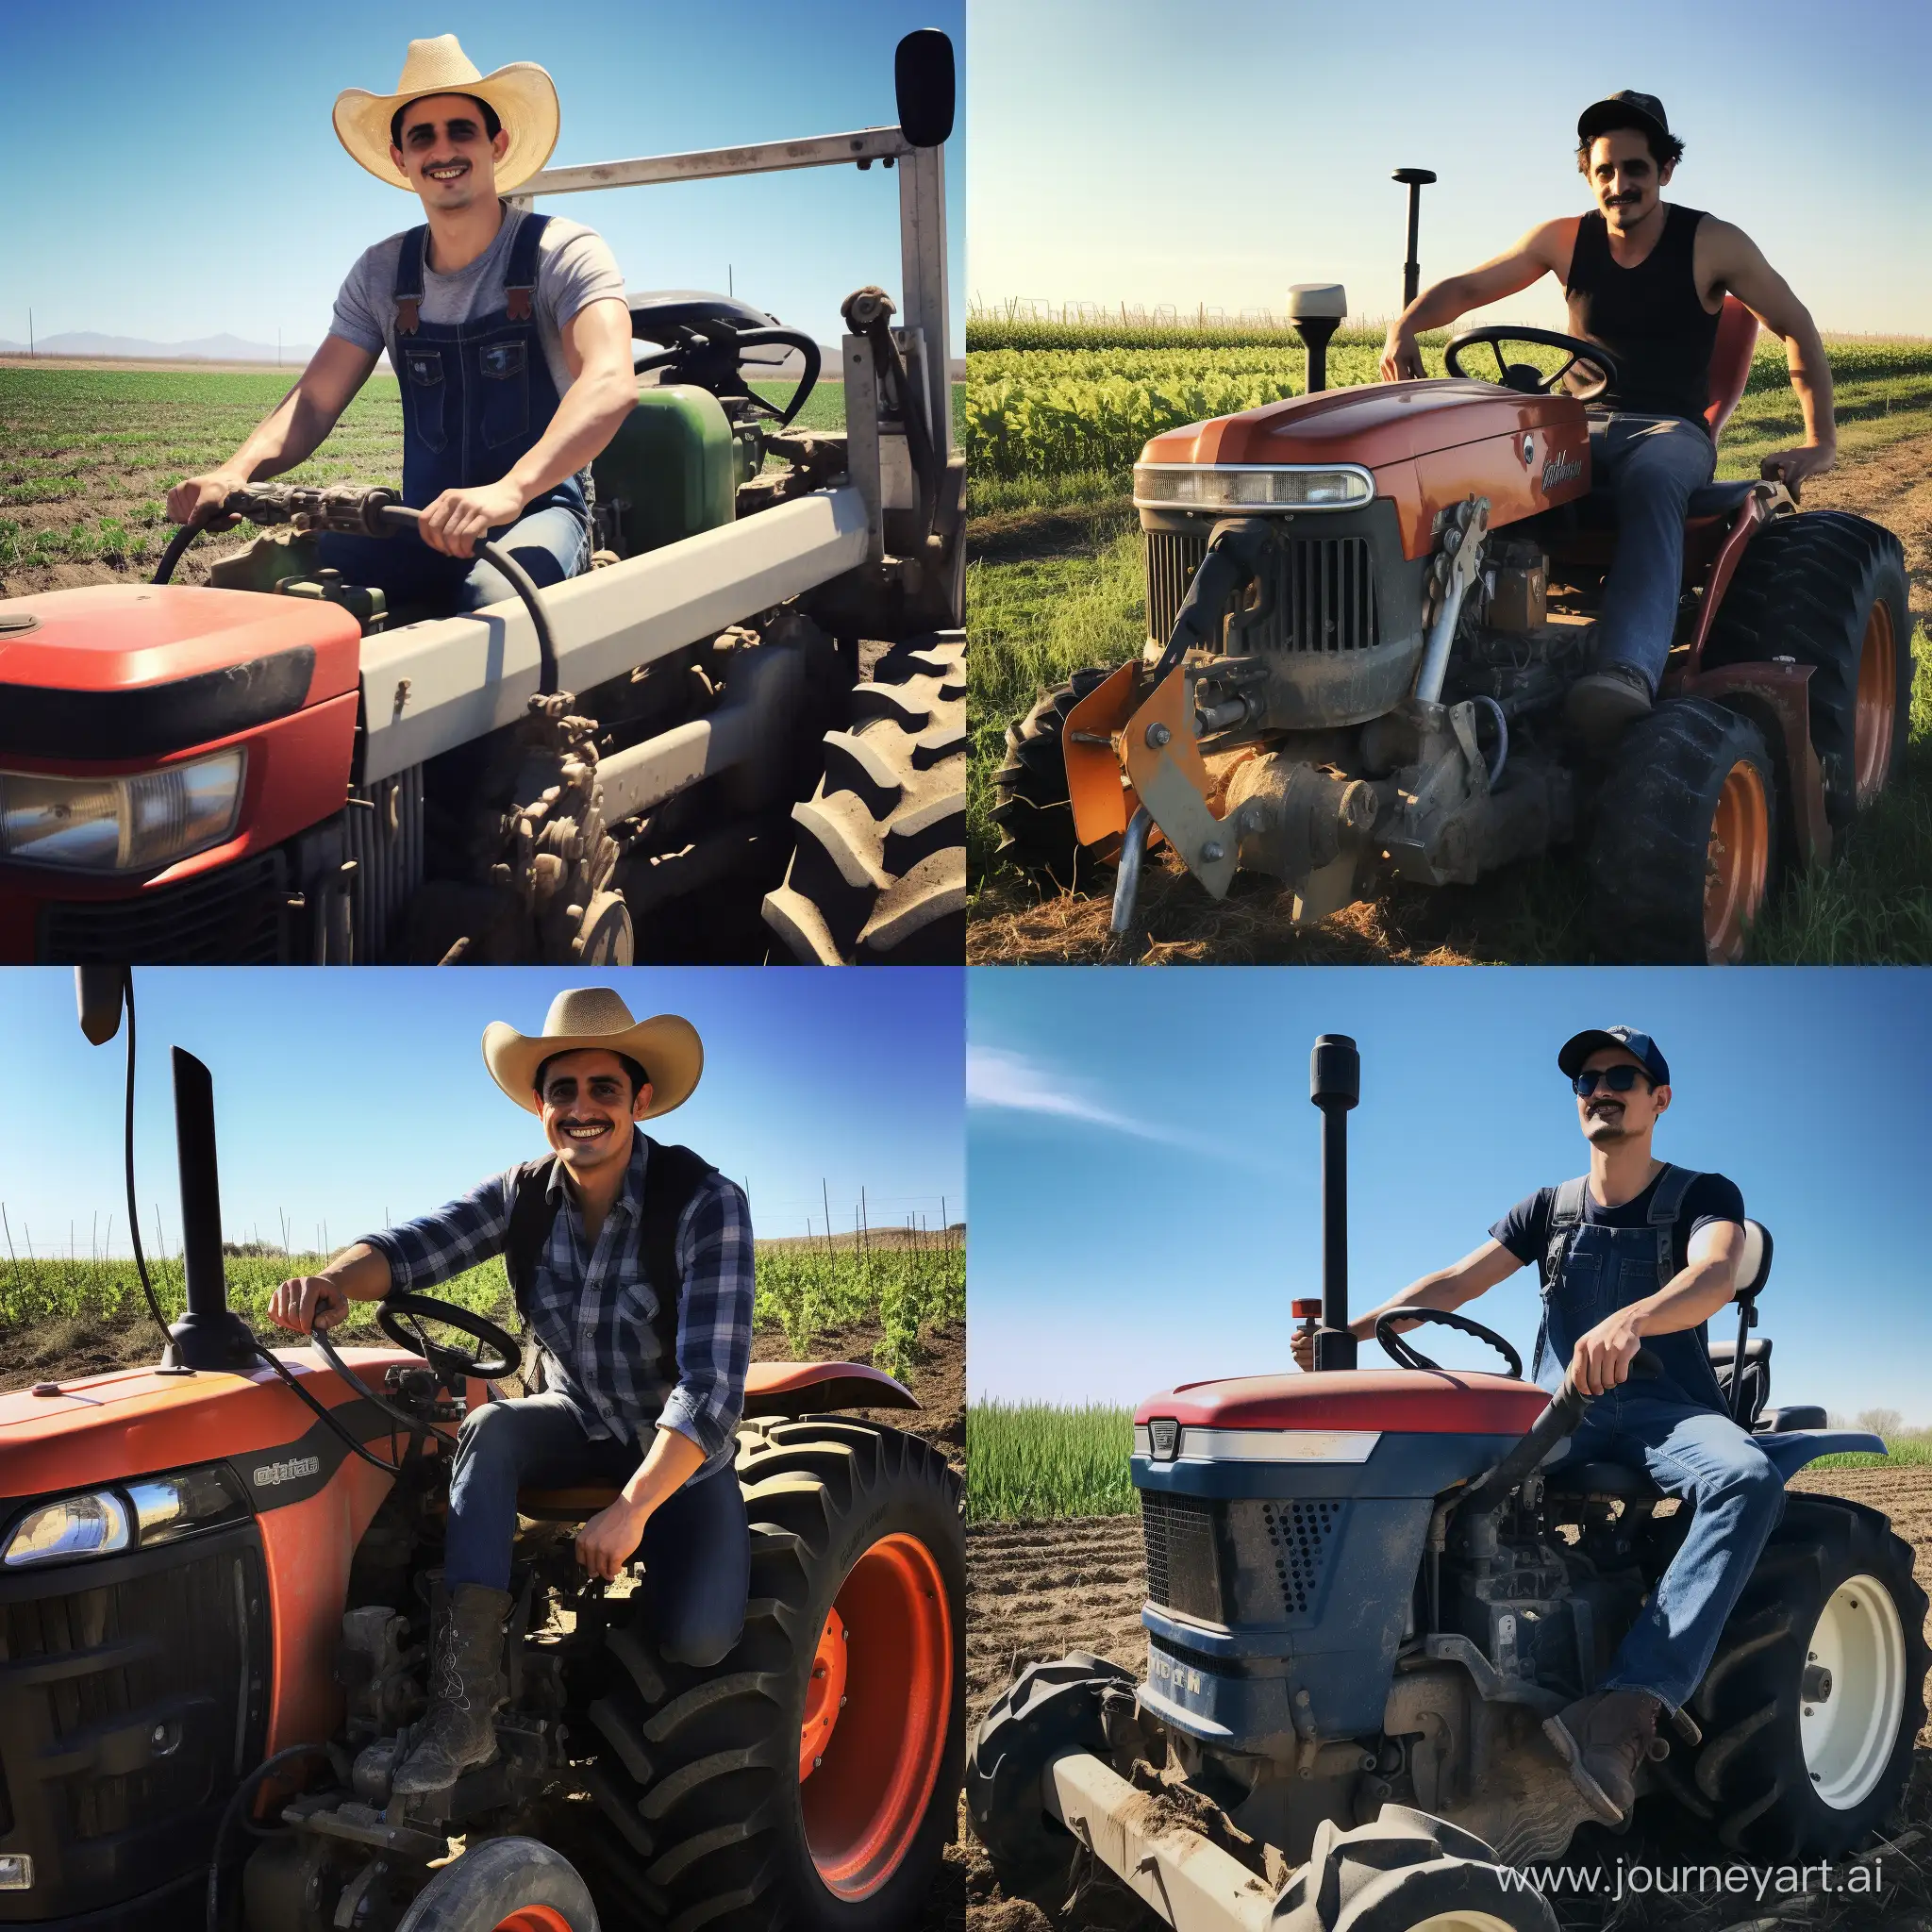 Country-Music-Star-Brad-Paisley-Poses-with-Impressive-6ft-Tractor-Tiller-on-Chest